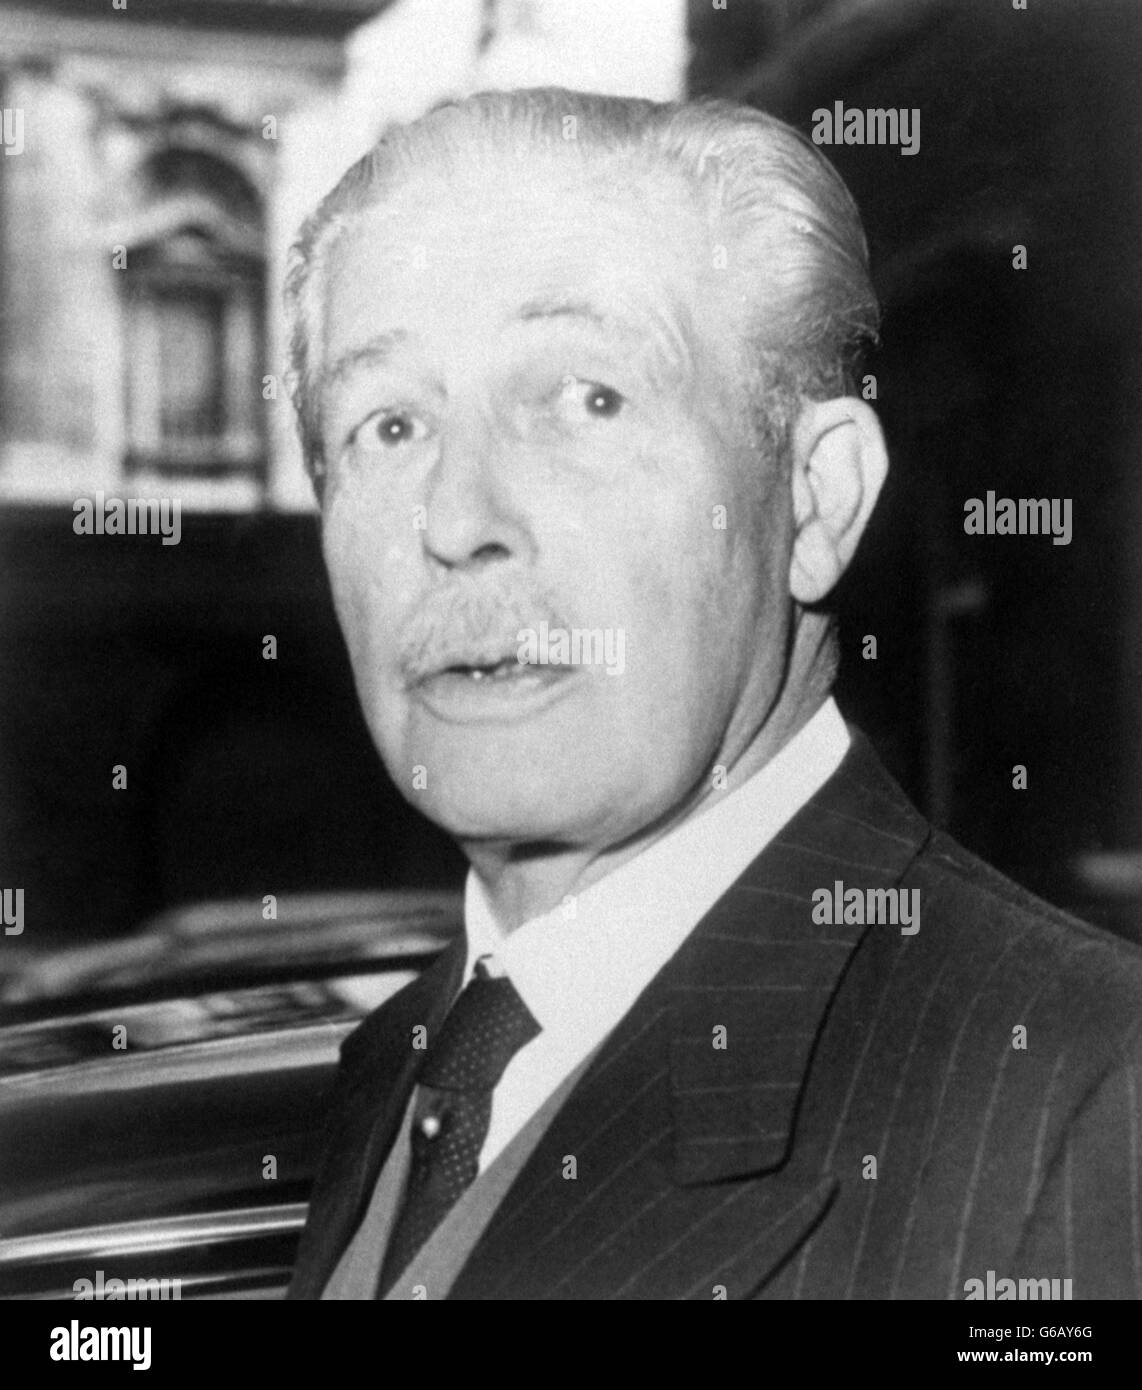 Prime Minister Harold Macmillan leaving Admiralty House, London, before returning to the renovated No 10 Downing Street, London. 25/09/1963 Stock Photo